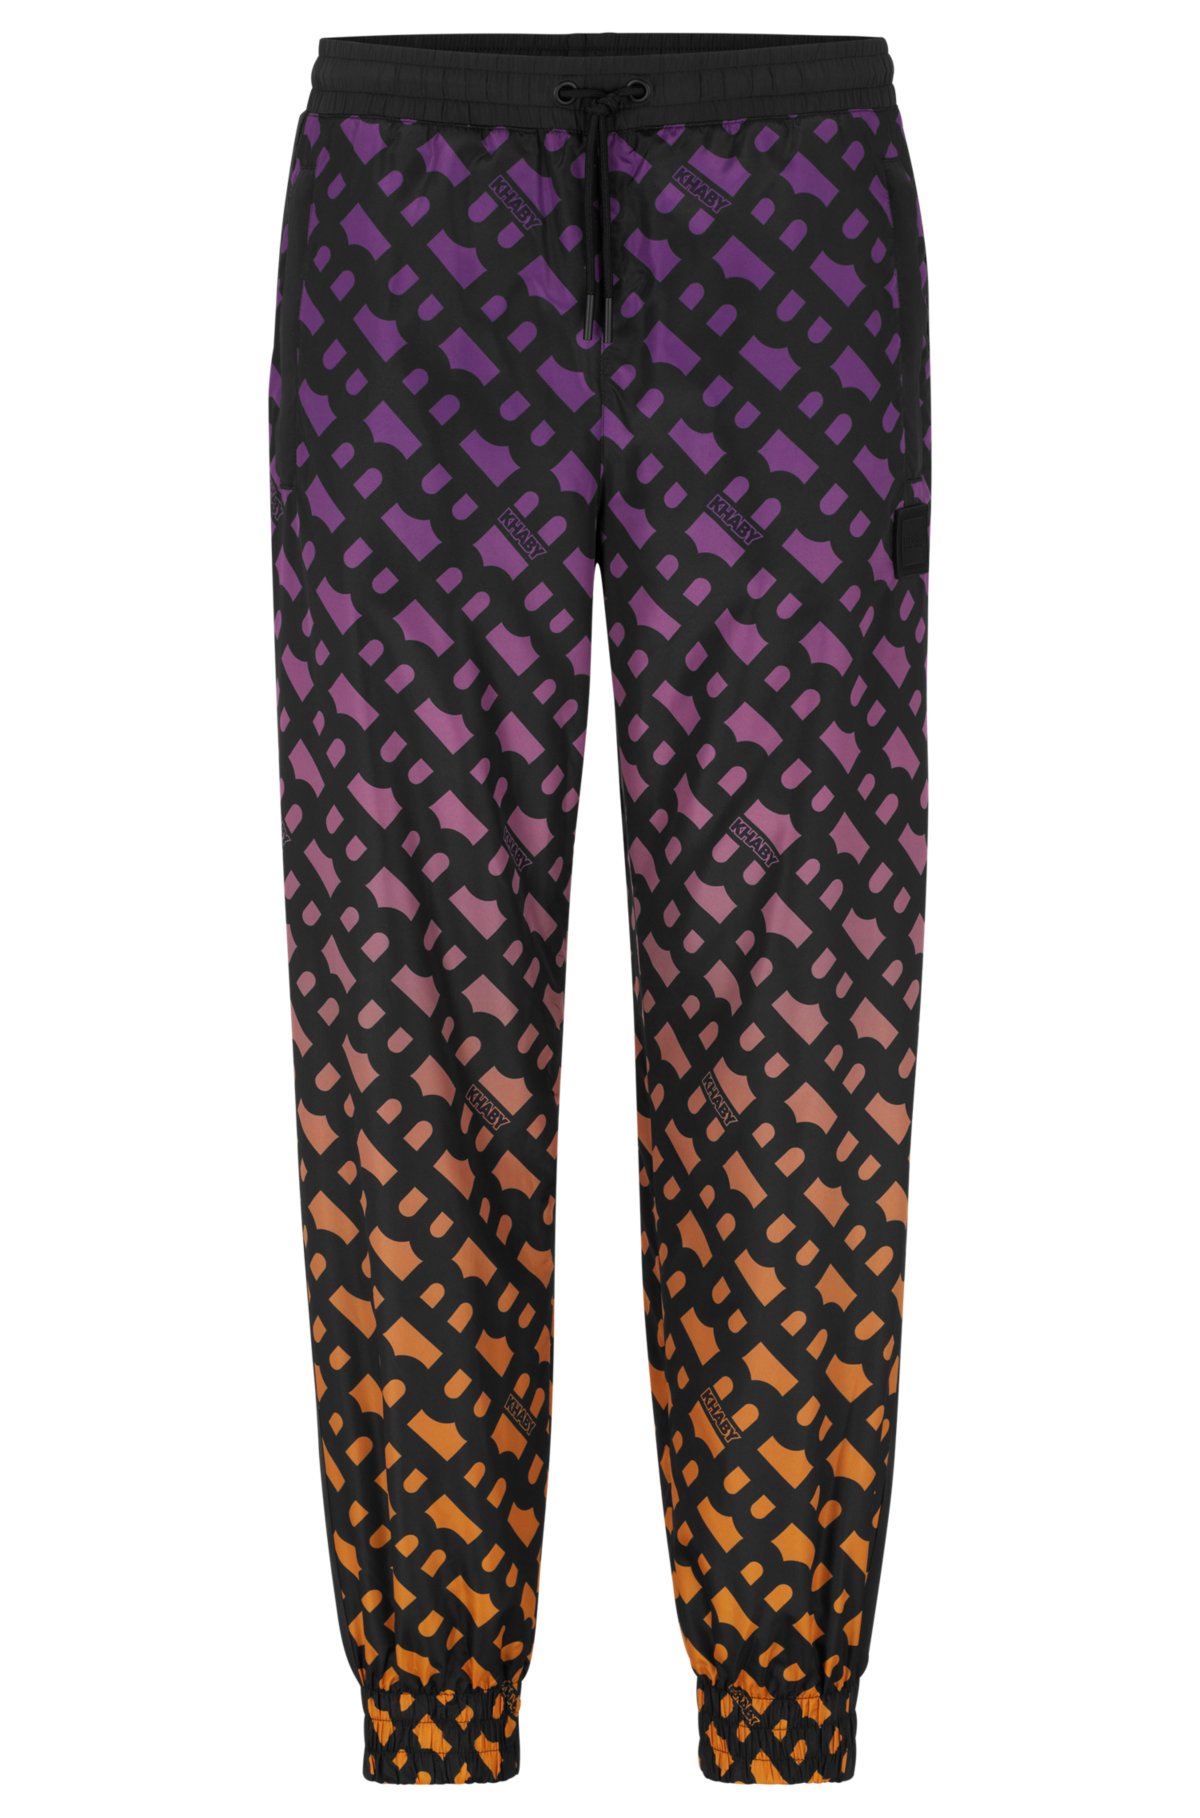 Relaxed Fit Pyjama bottoms